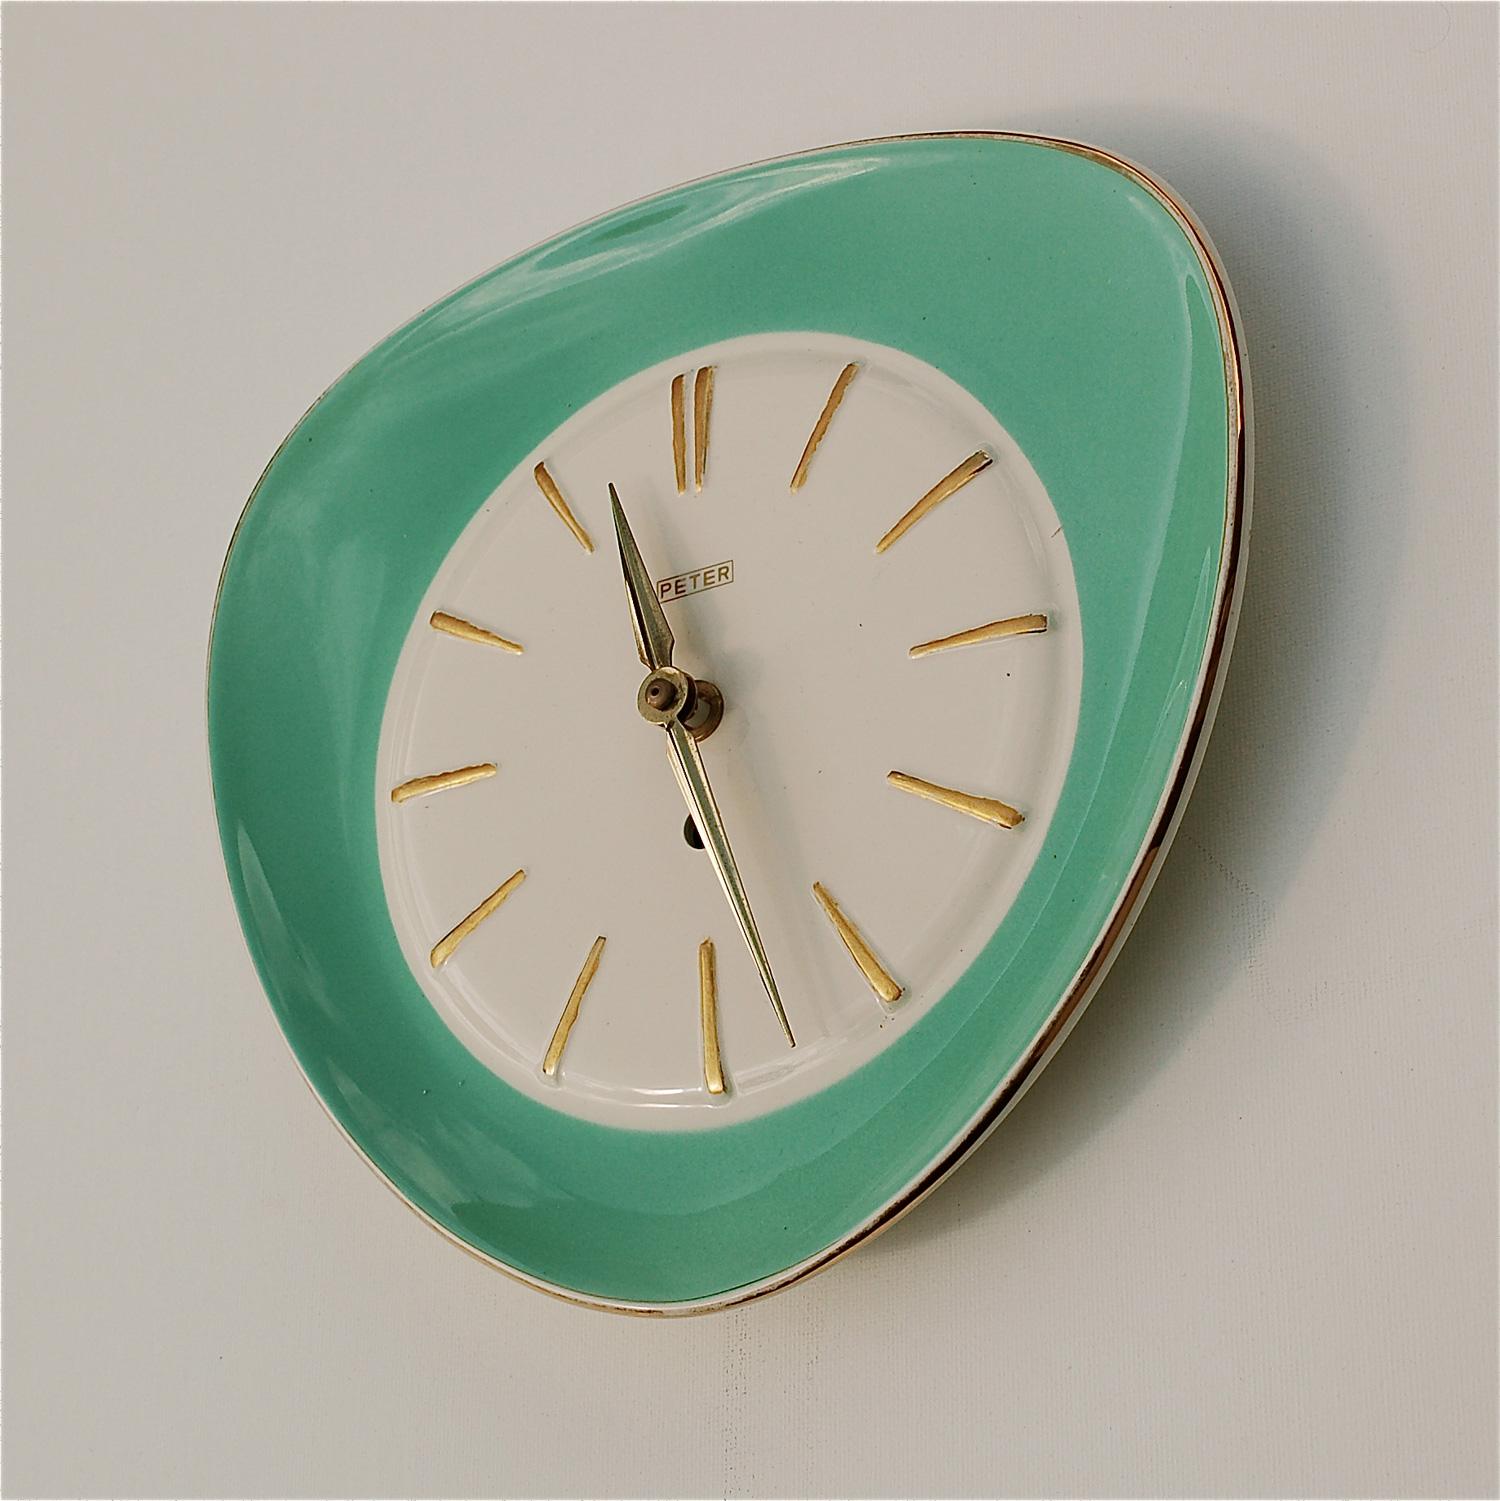 1960s vintage ceramic wall clock with a turquoise glazed front and gold trim. It is triangular in shape with curved corners and has an open clock face. The makers name Peter is featured at the top of the dial. The slightly raised stripes round the